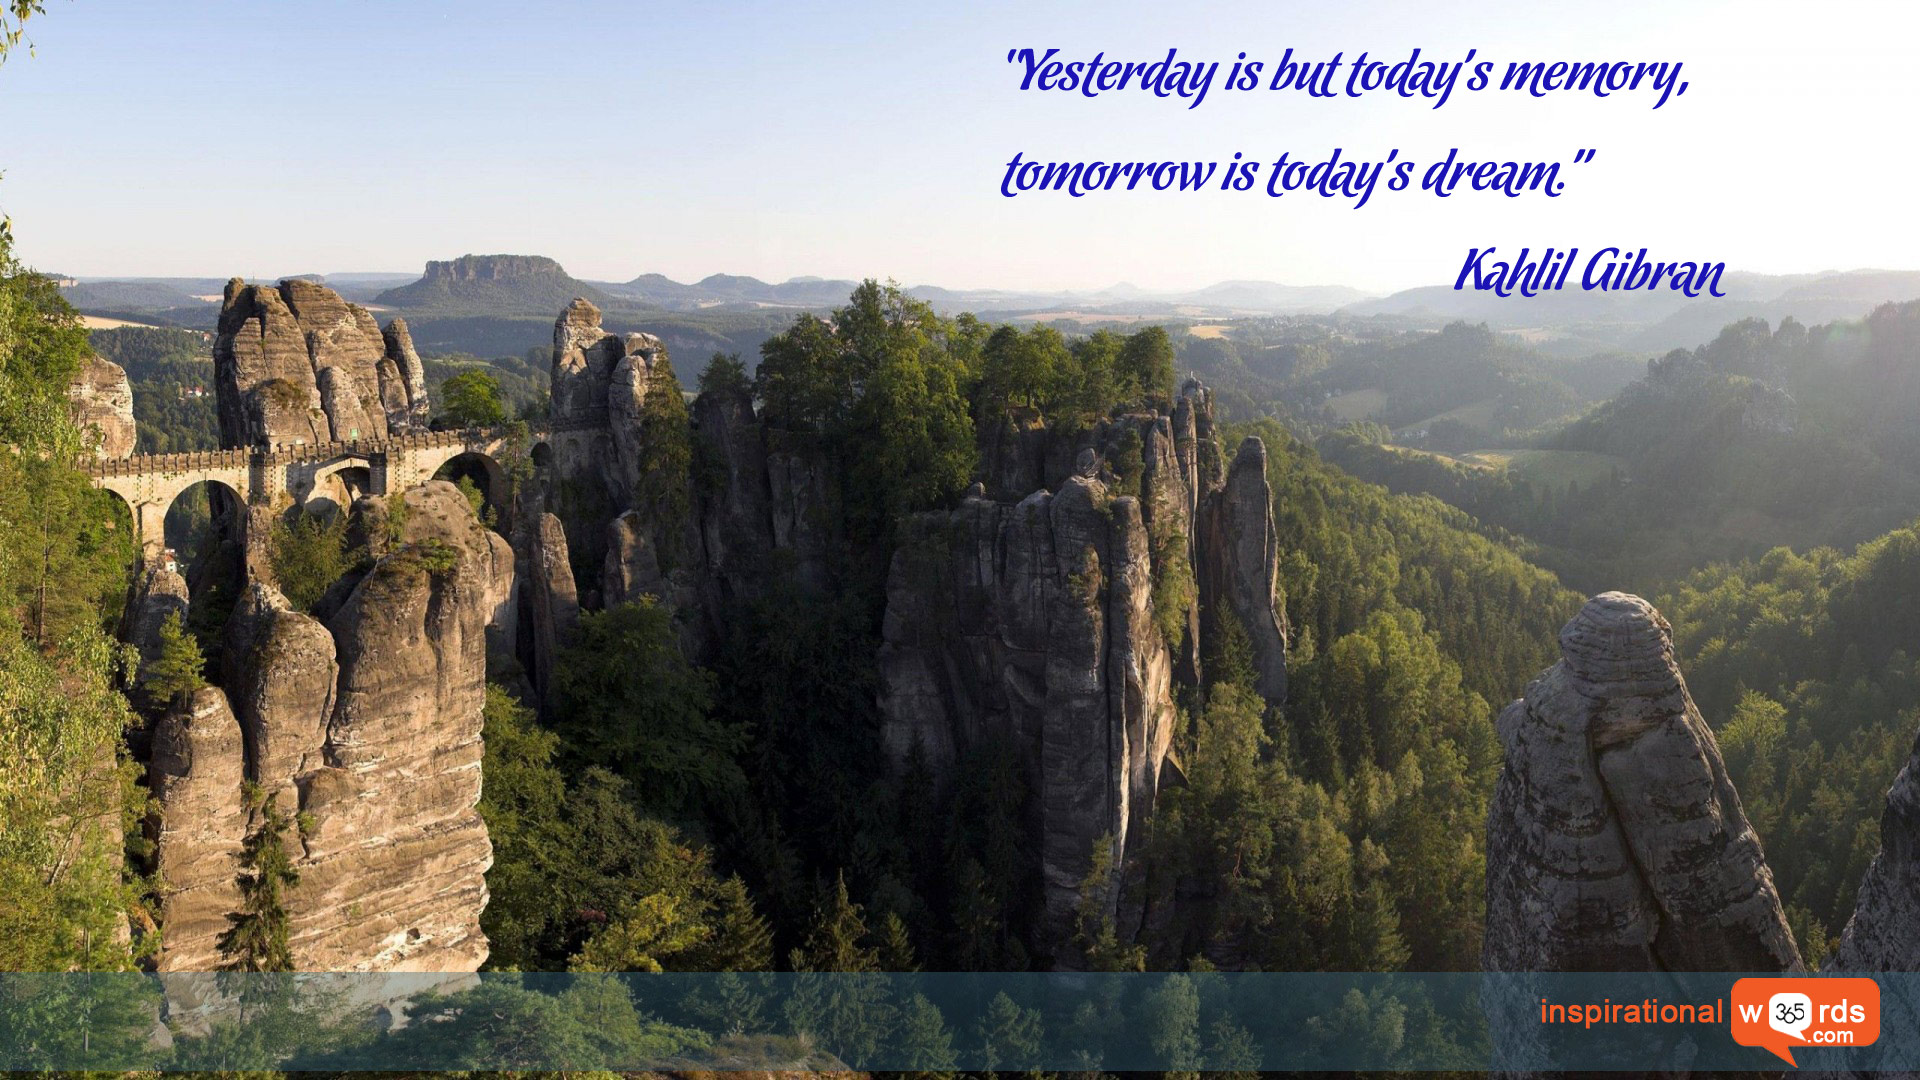 Inspirational Wallpaper Quote by Kahlil Gibran